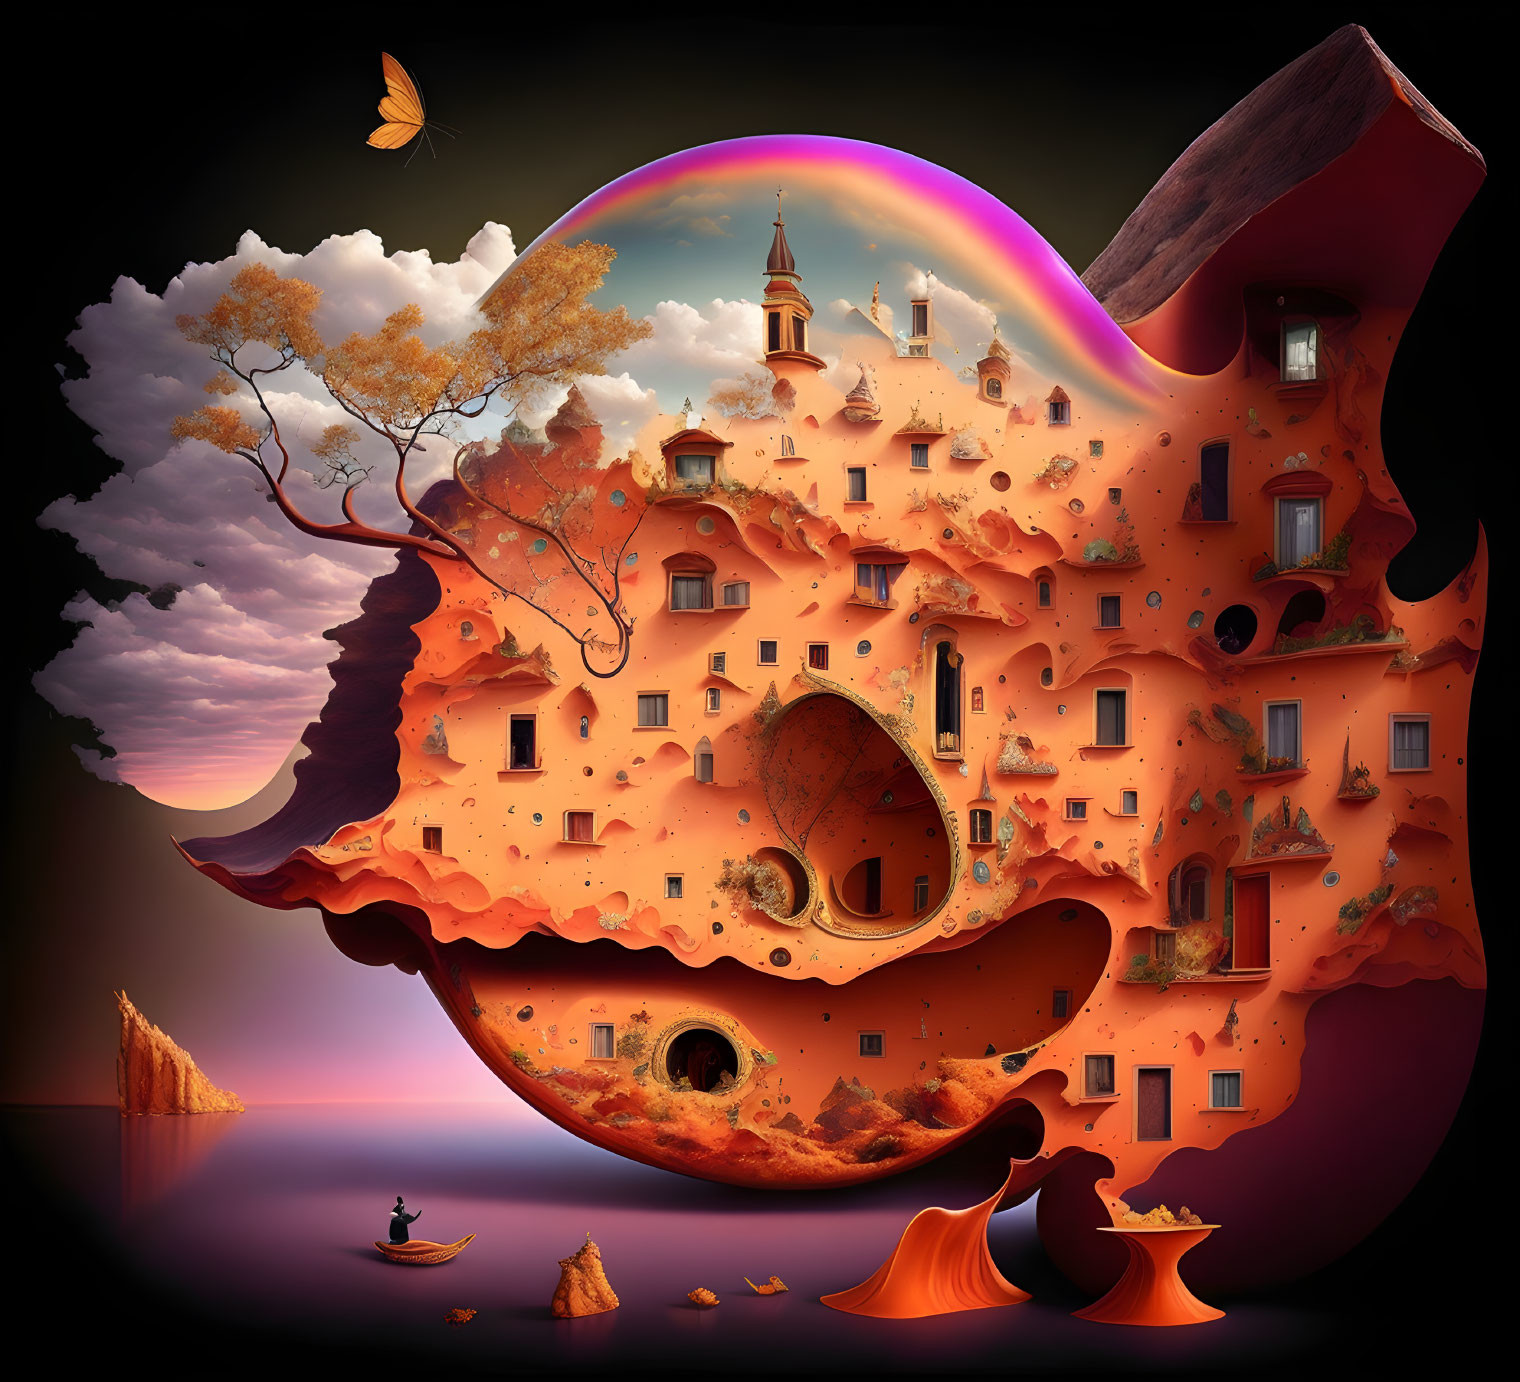 Surreal artwork: orange melting landscape with buildings, trees, butterfly, boat, and irides